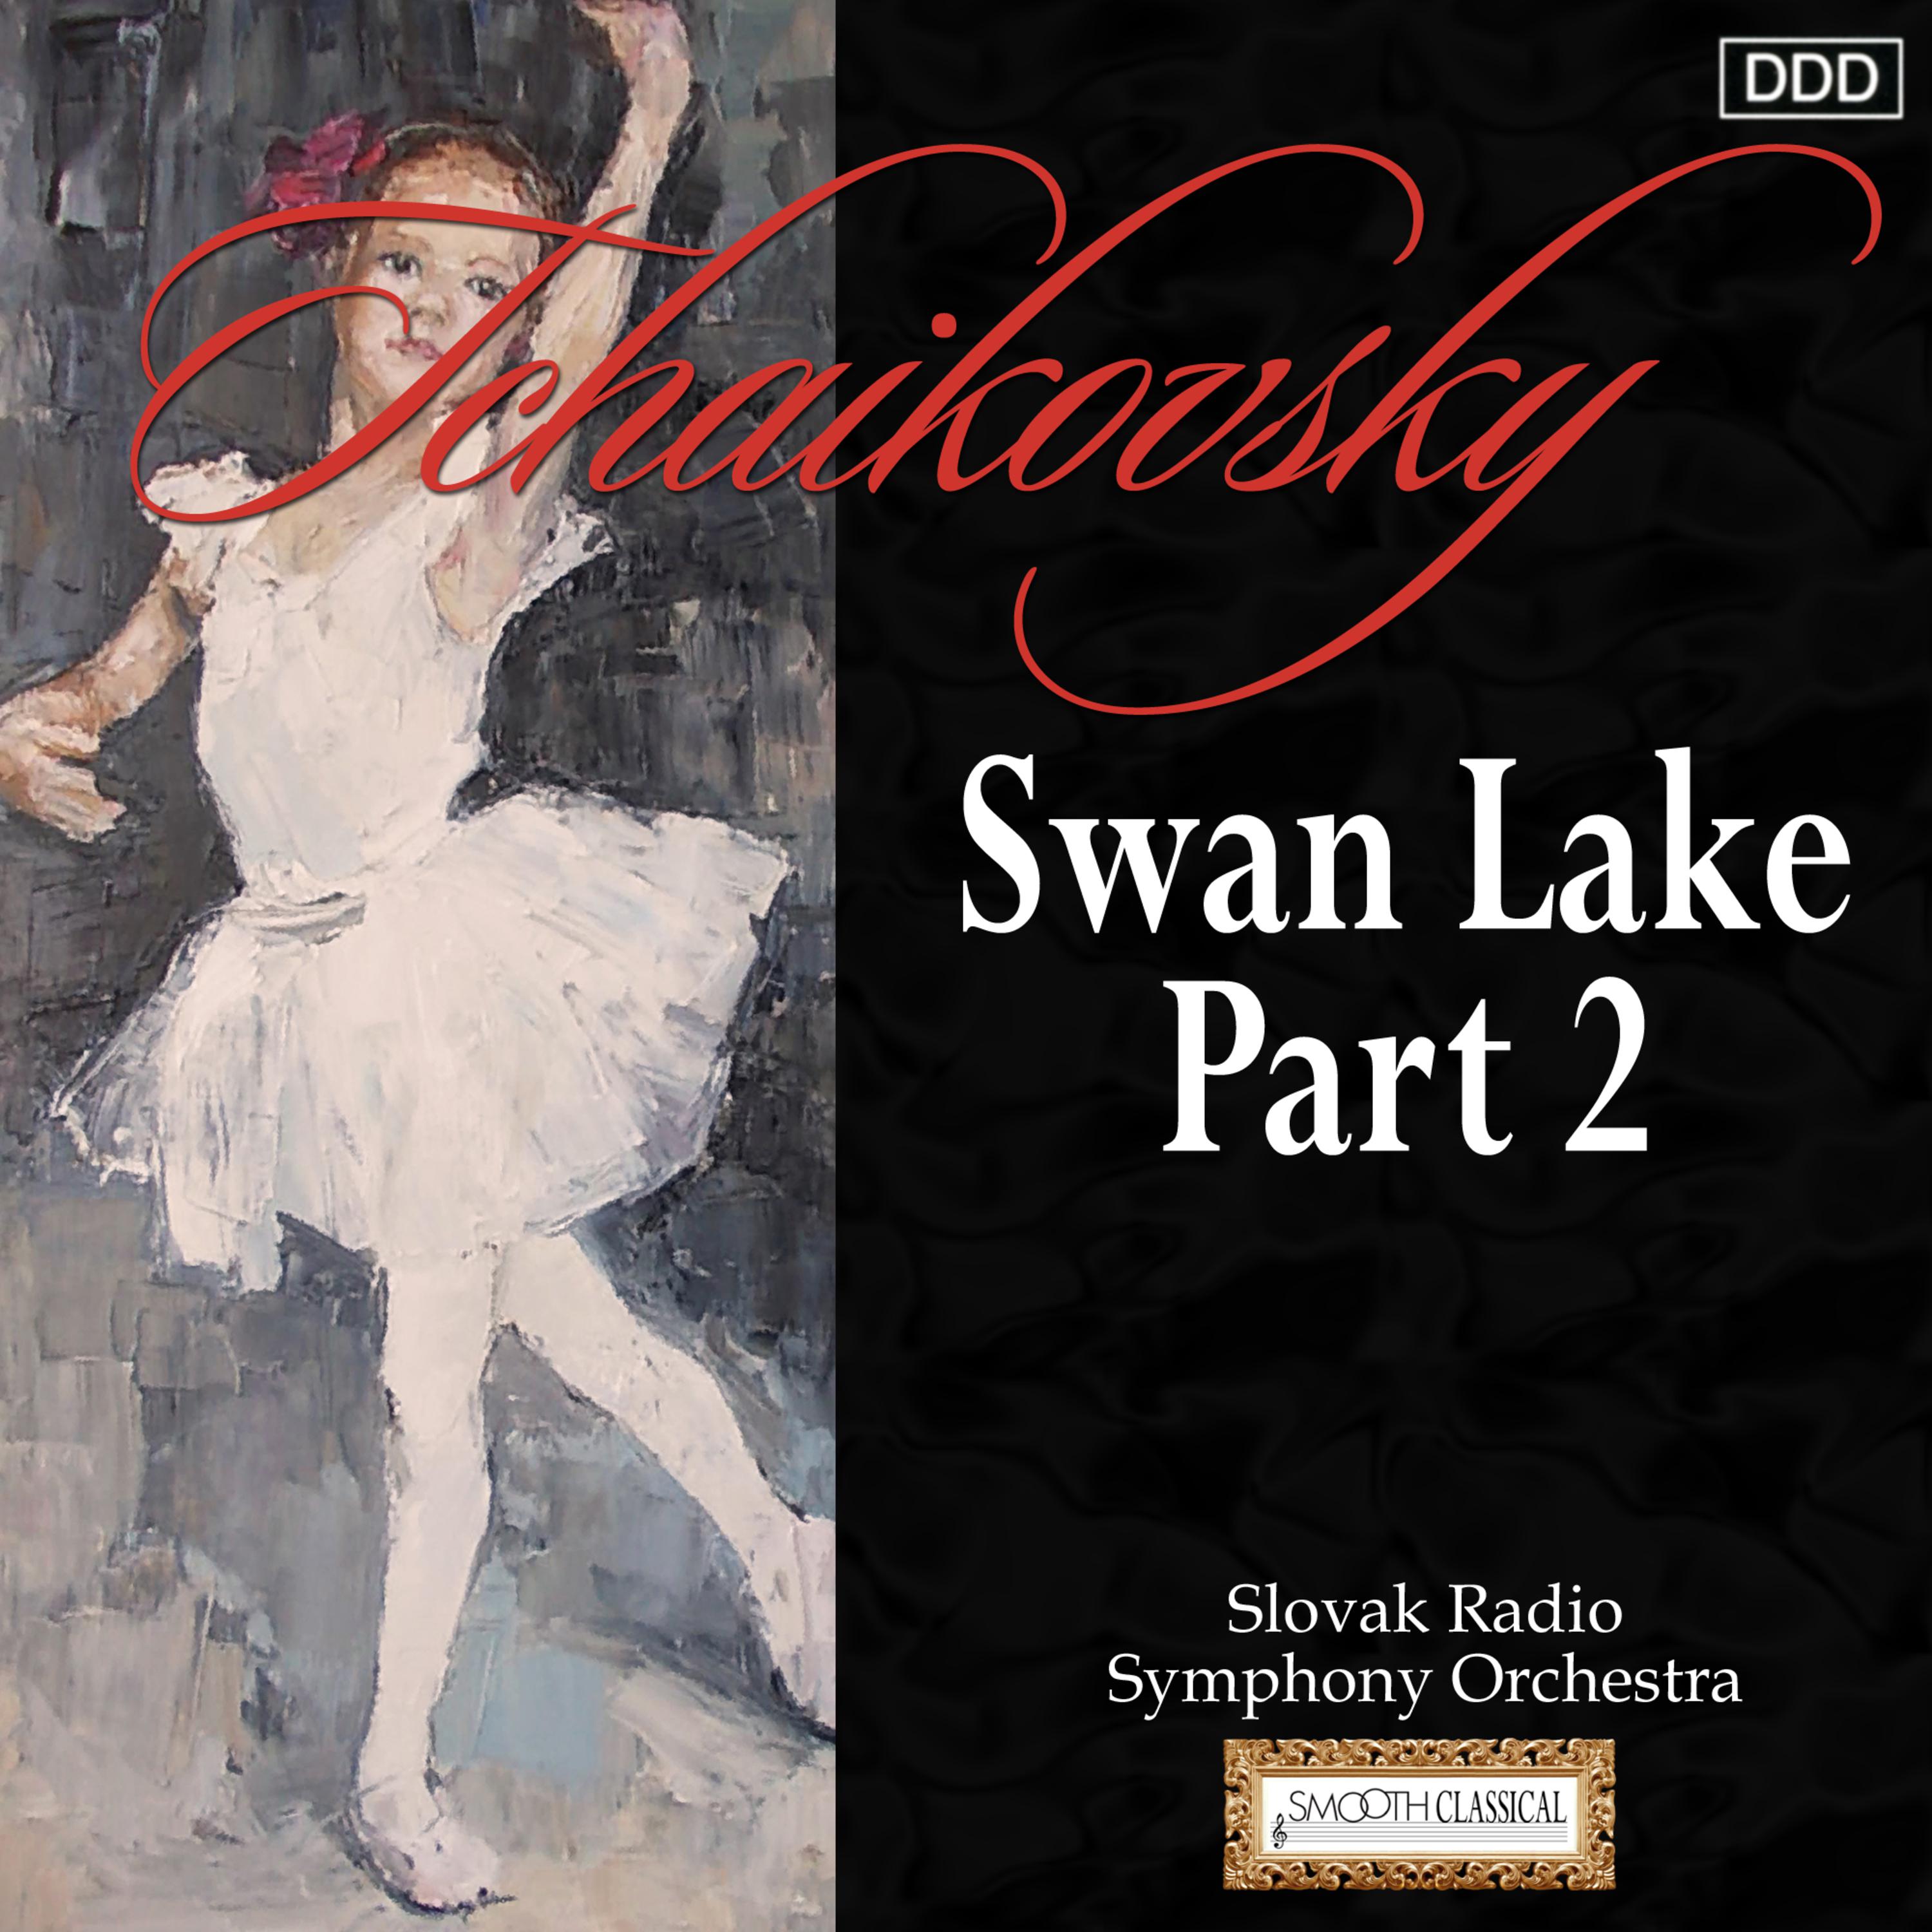 Swan Lake, Op. 20a, Act III: In the Castle of Prince Siegfried - A Ball At The Castle: II. Dance of Corps de Ballet and Dwarves